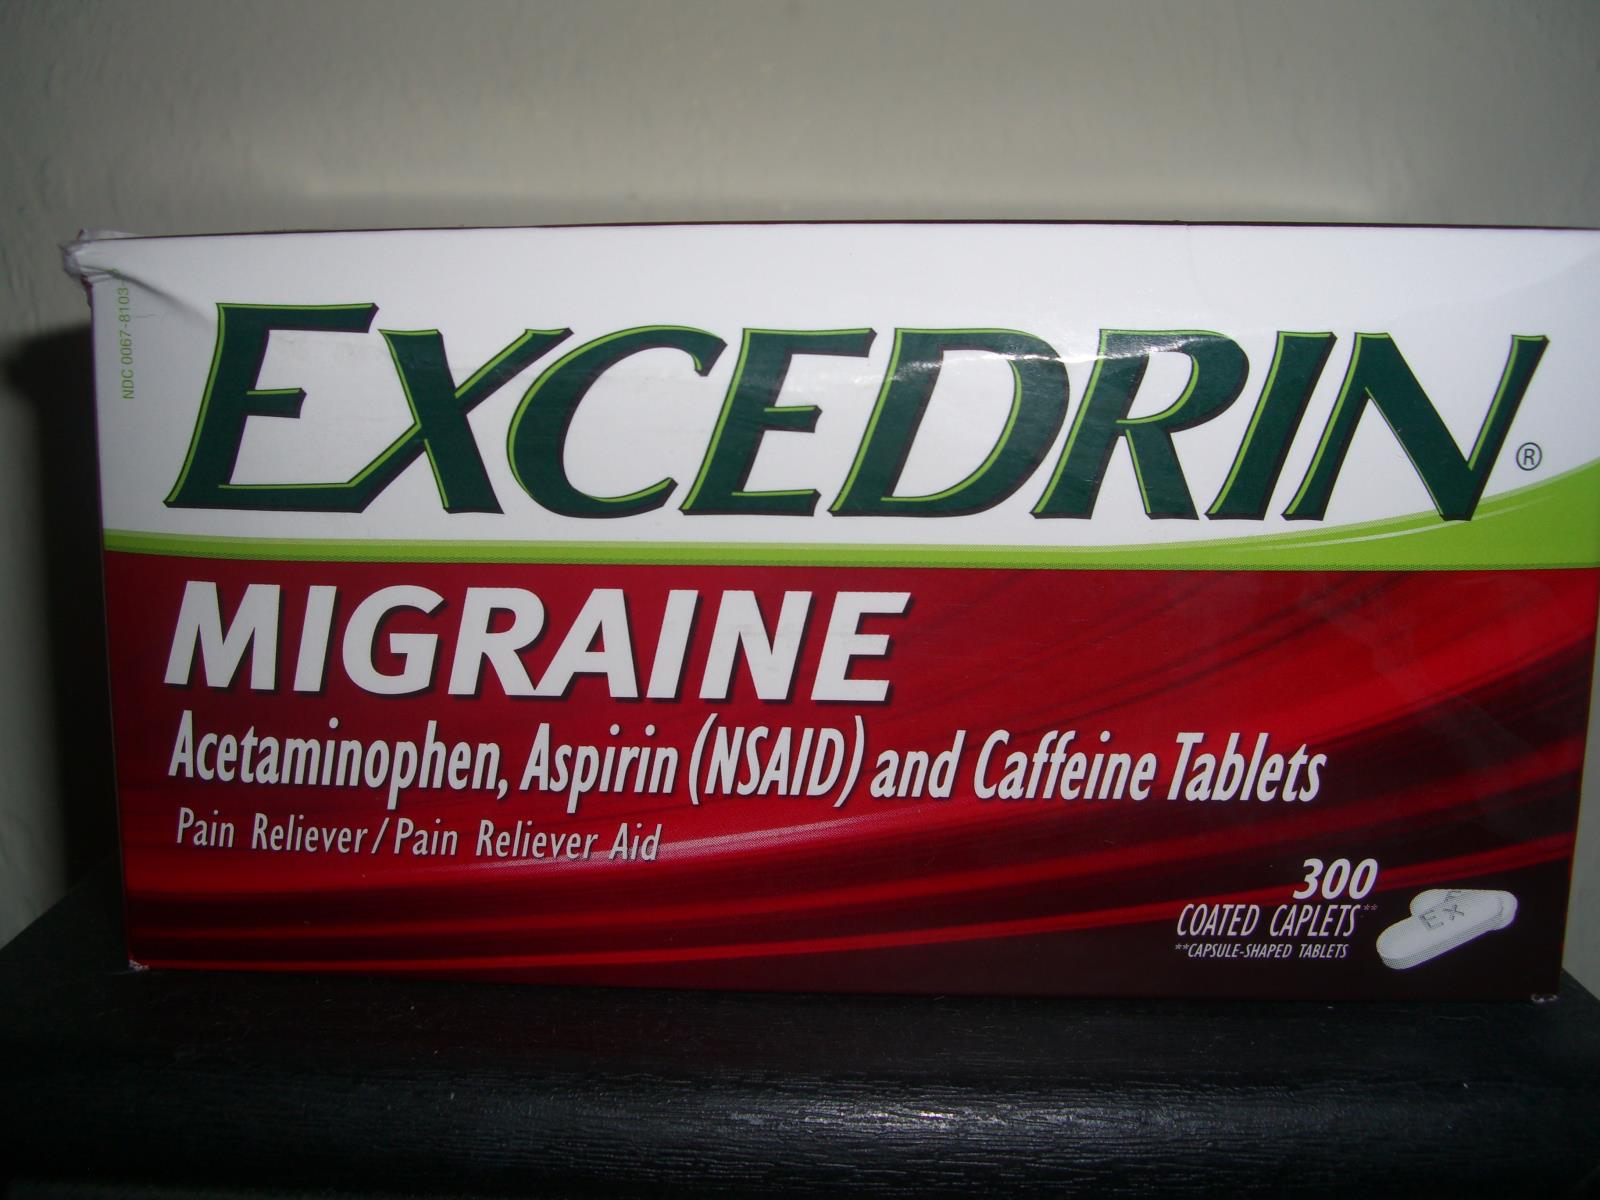 GlaxoSmithKline suspends two Excedrin products